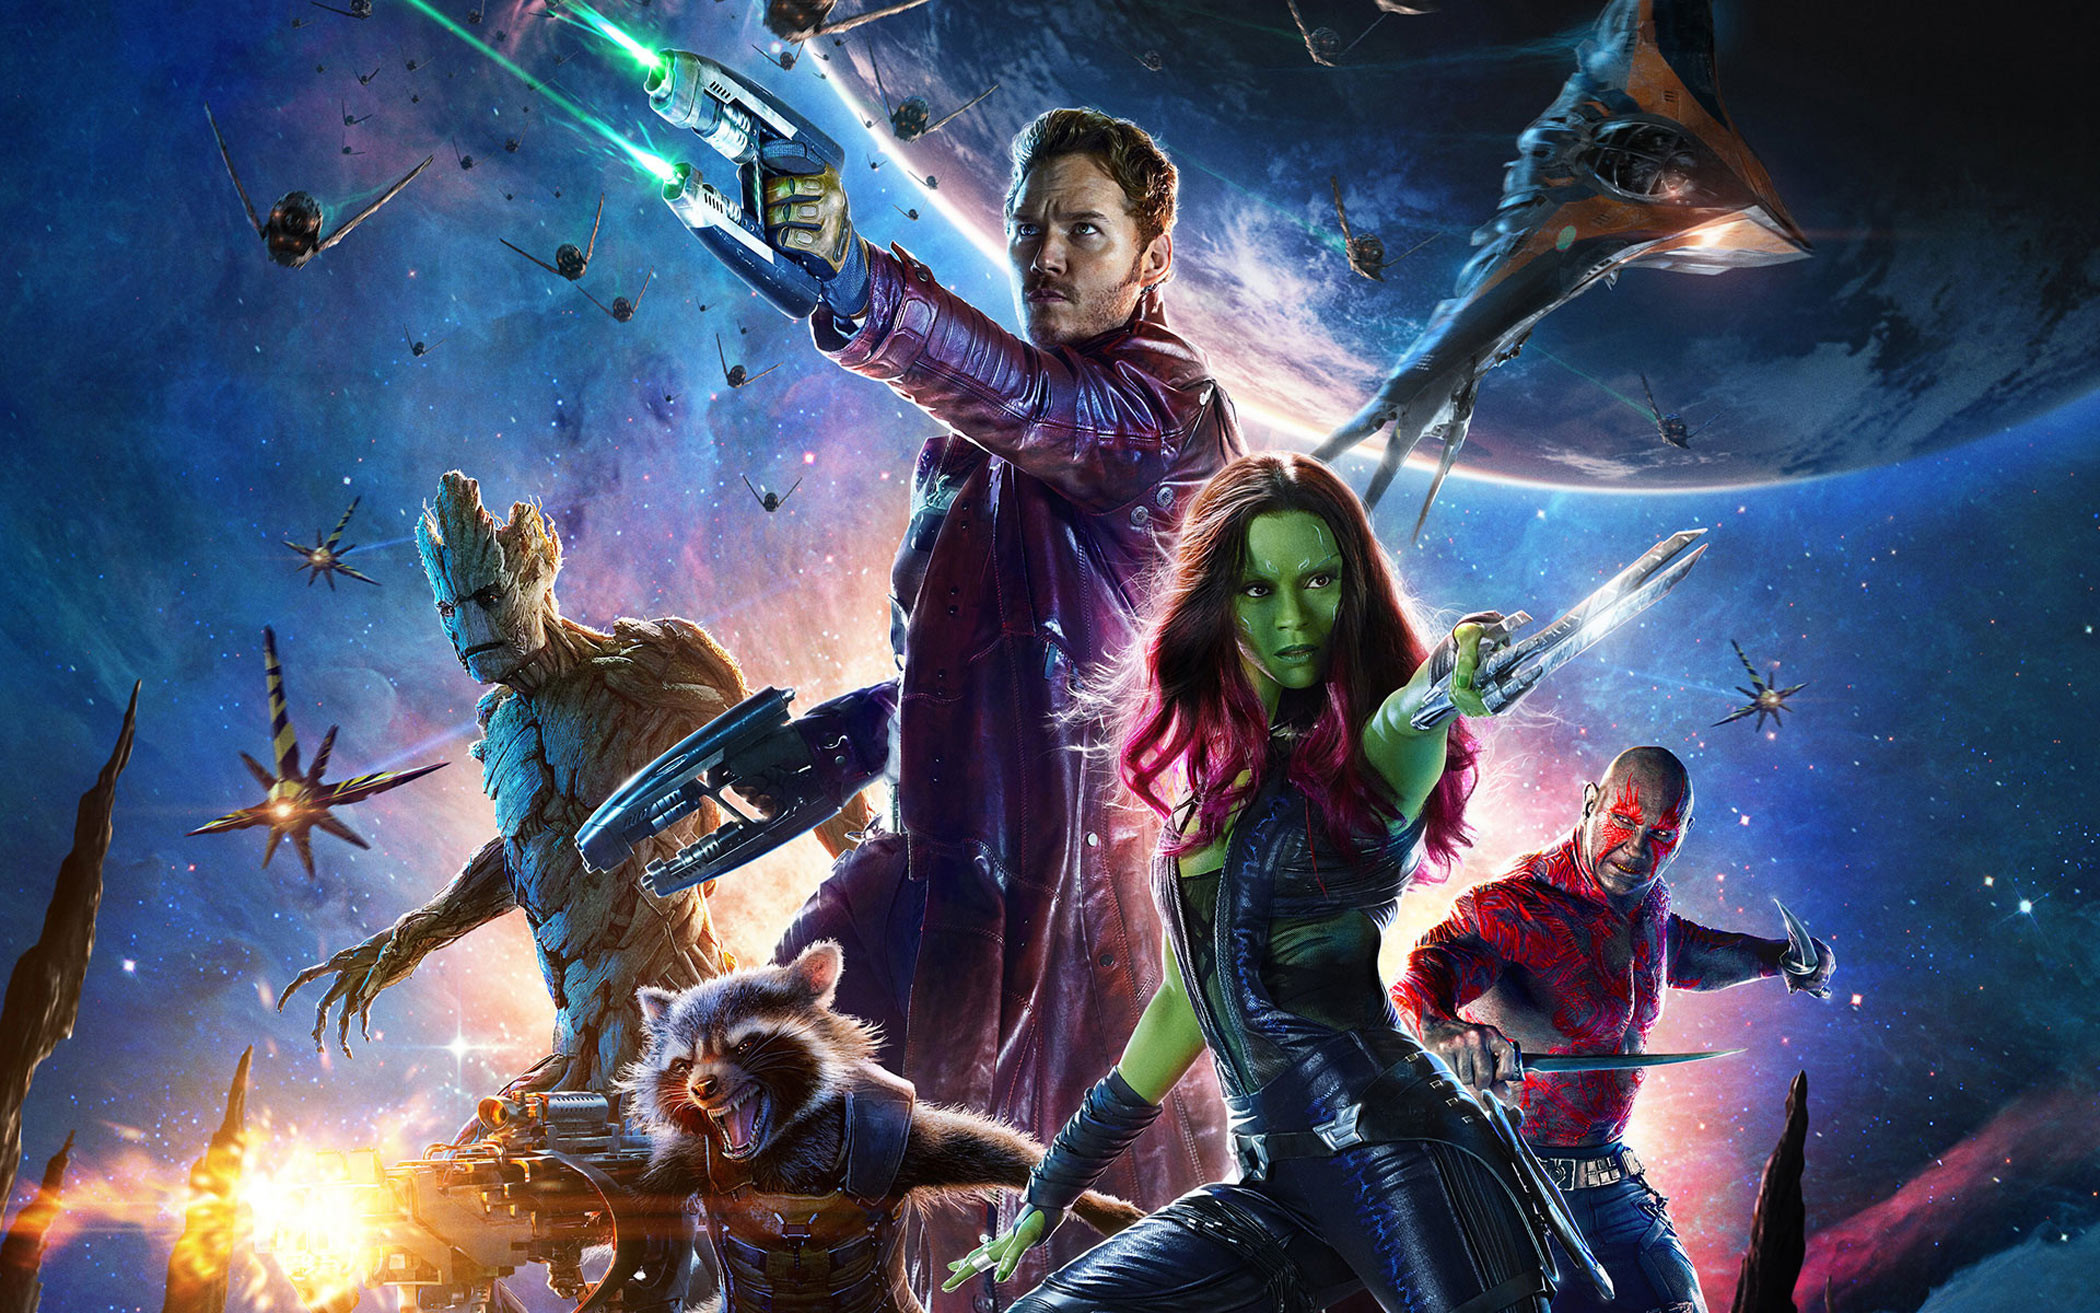 Guardians of the Galaxy awesome mix vol.1 -07. Jackson 5 - I Want You Back